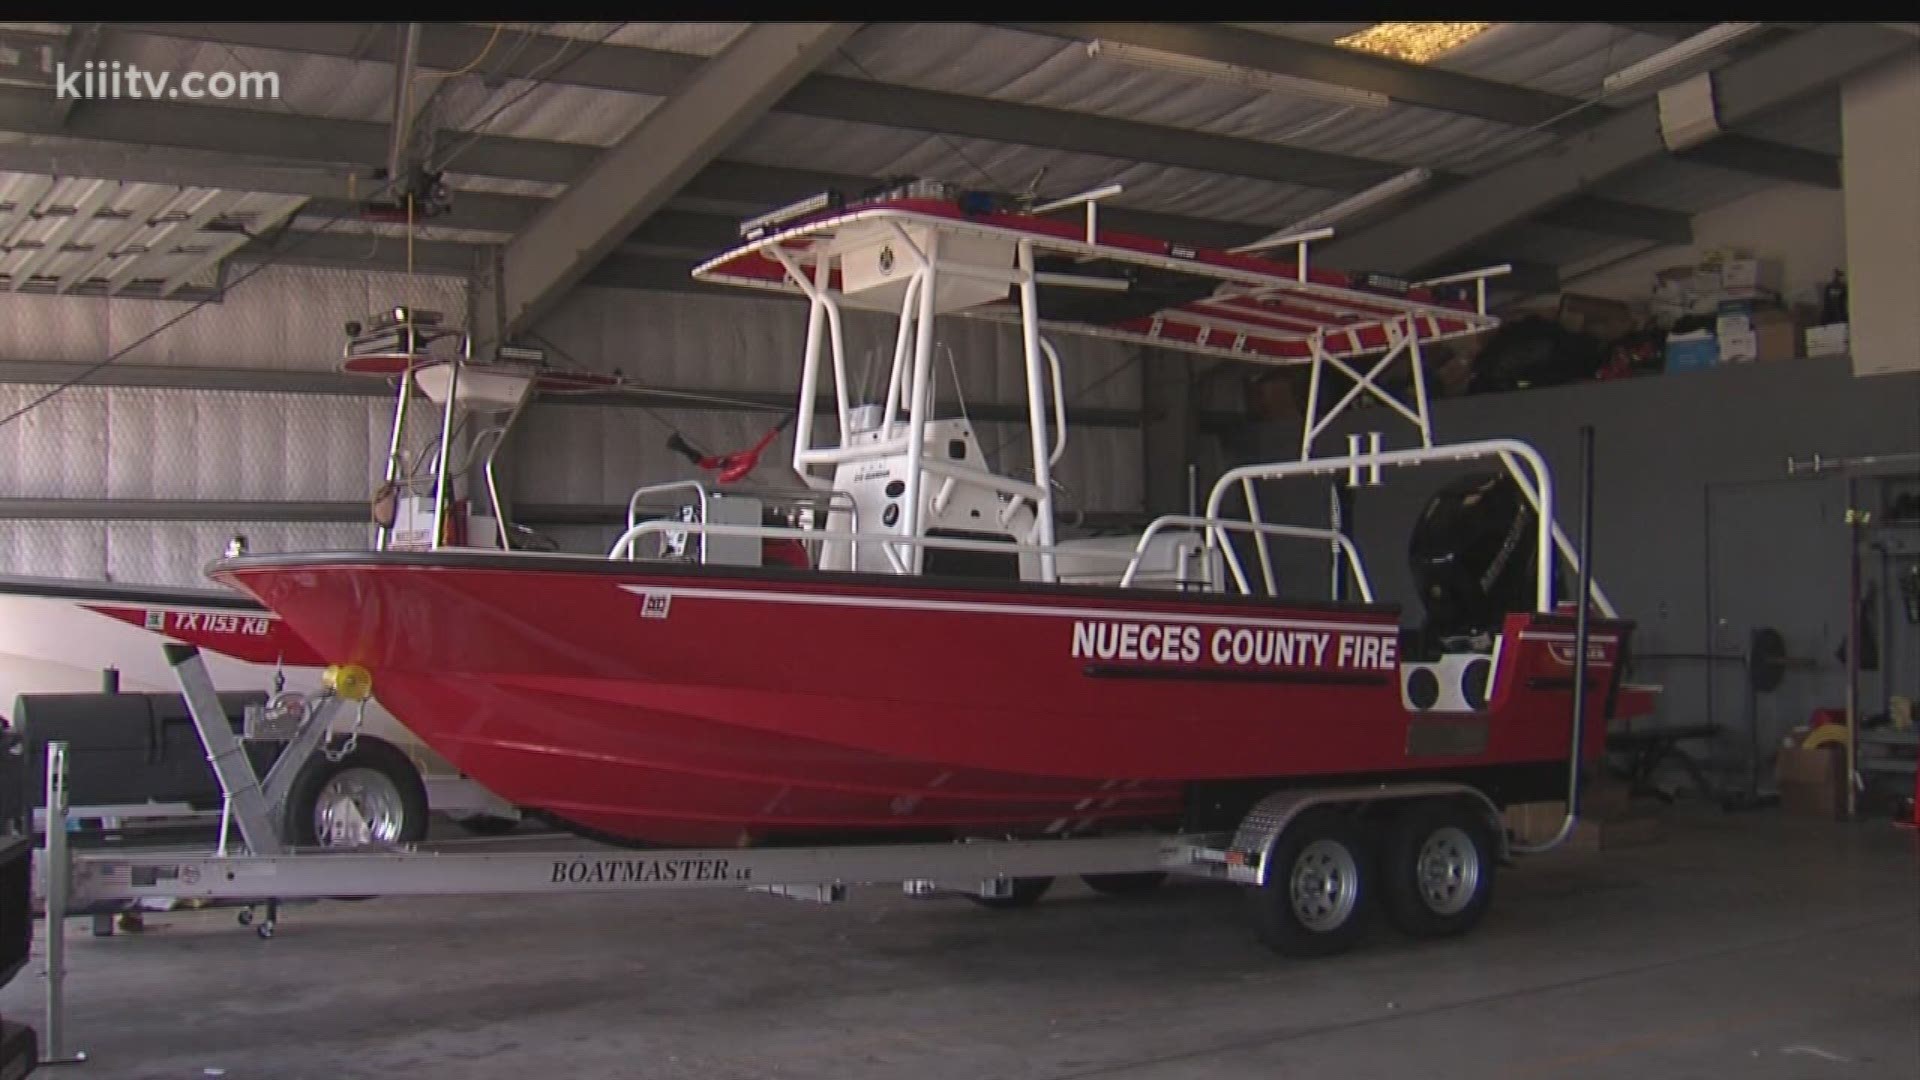 The new boat cost $135,000 and comes equipped with a pump that can spray up to 400-gallons of water a minute to help put out fires.